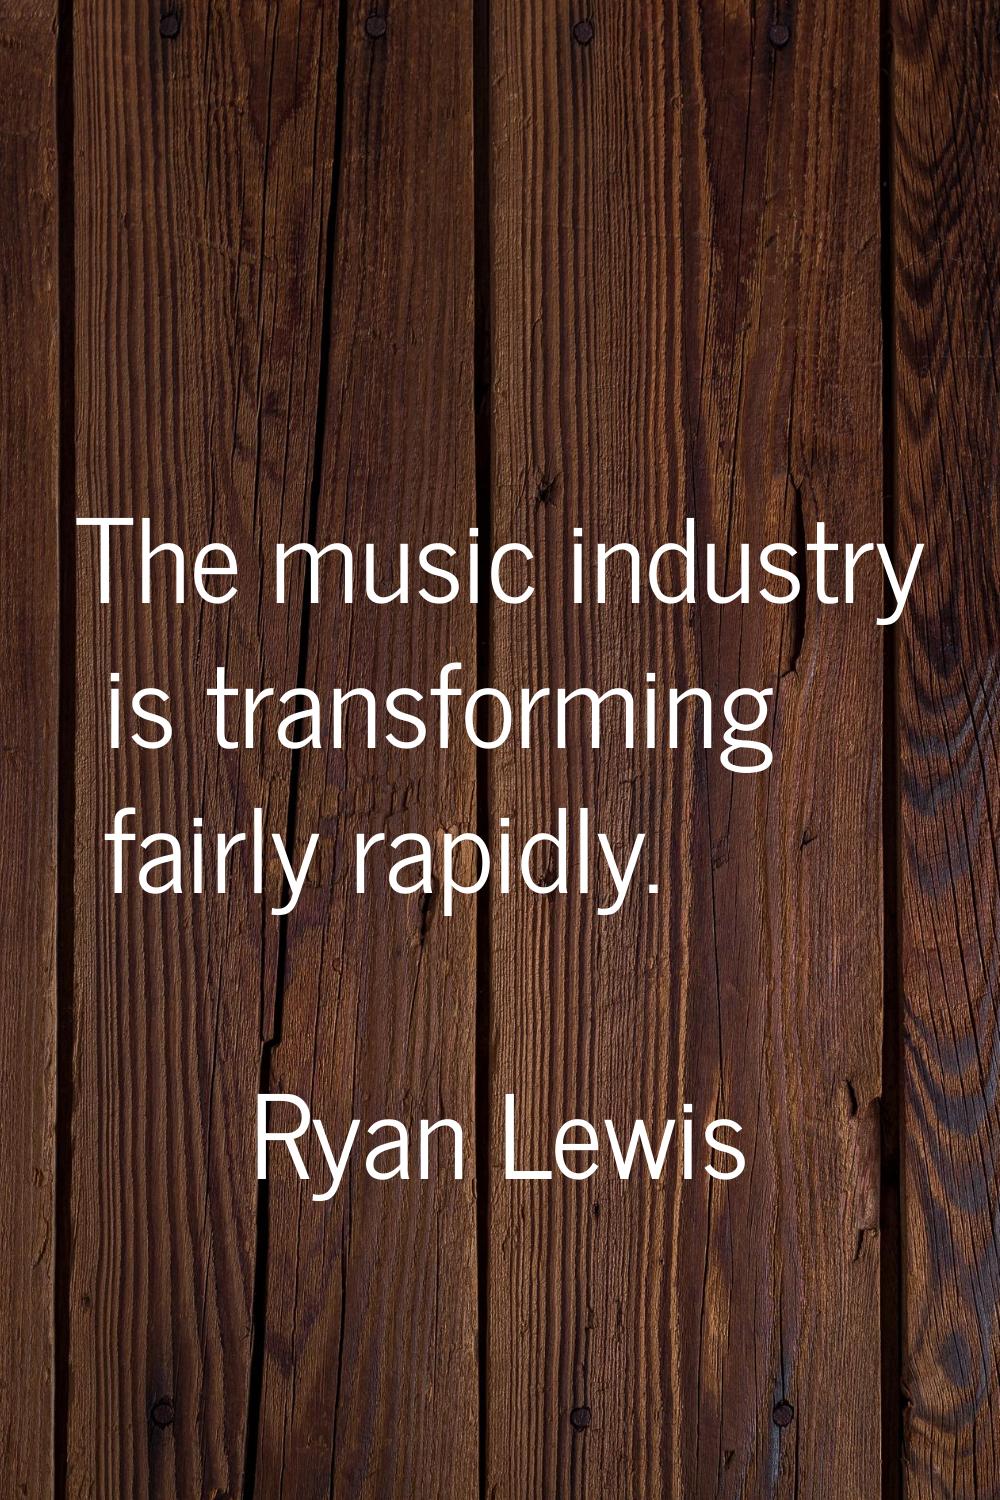 The music industry is transforming fairly rapidly.